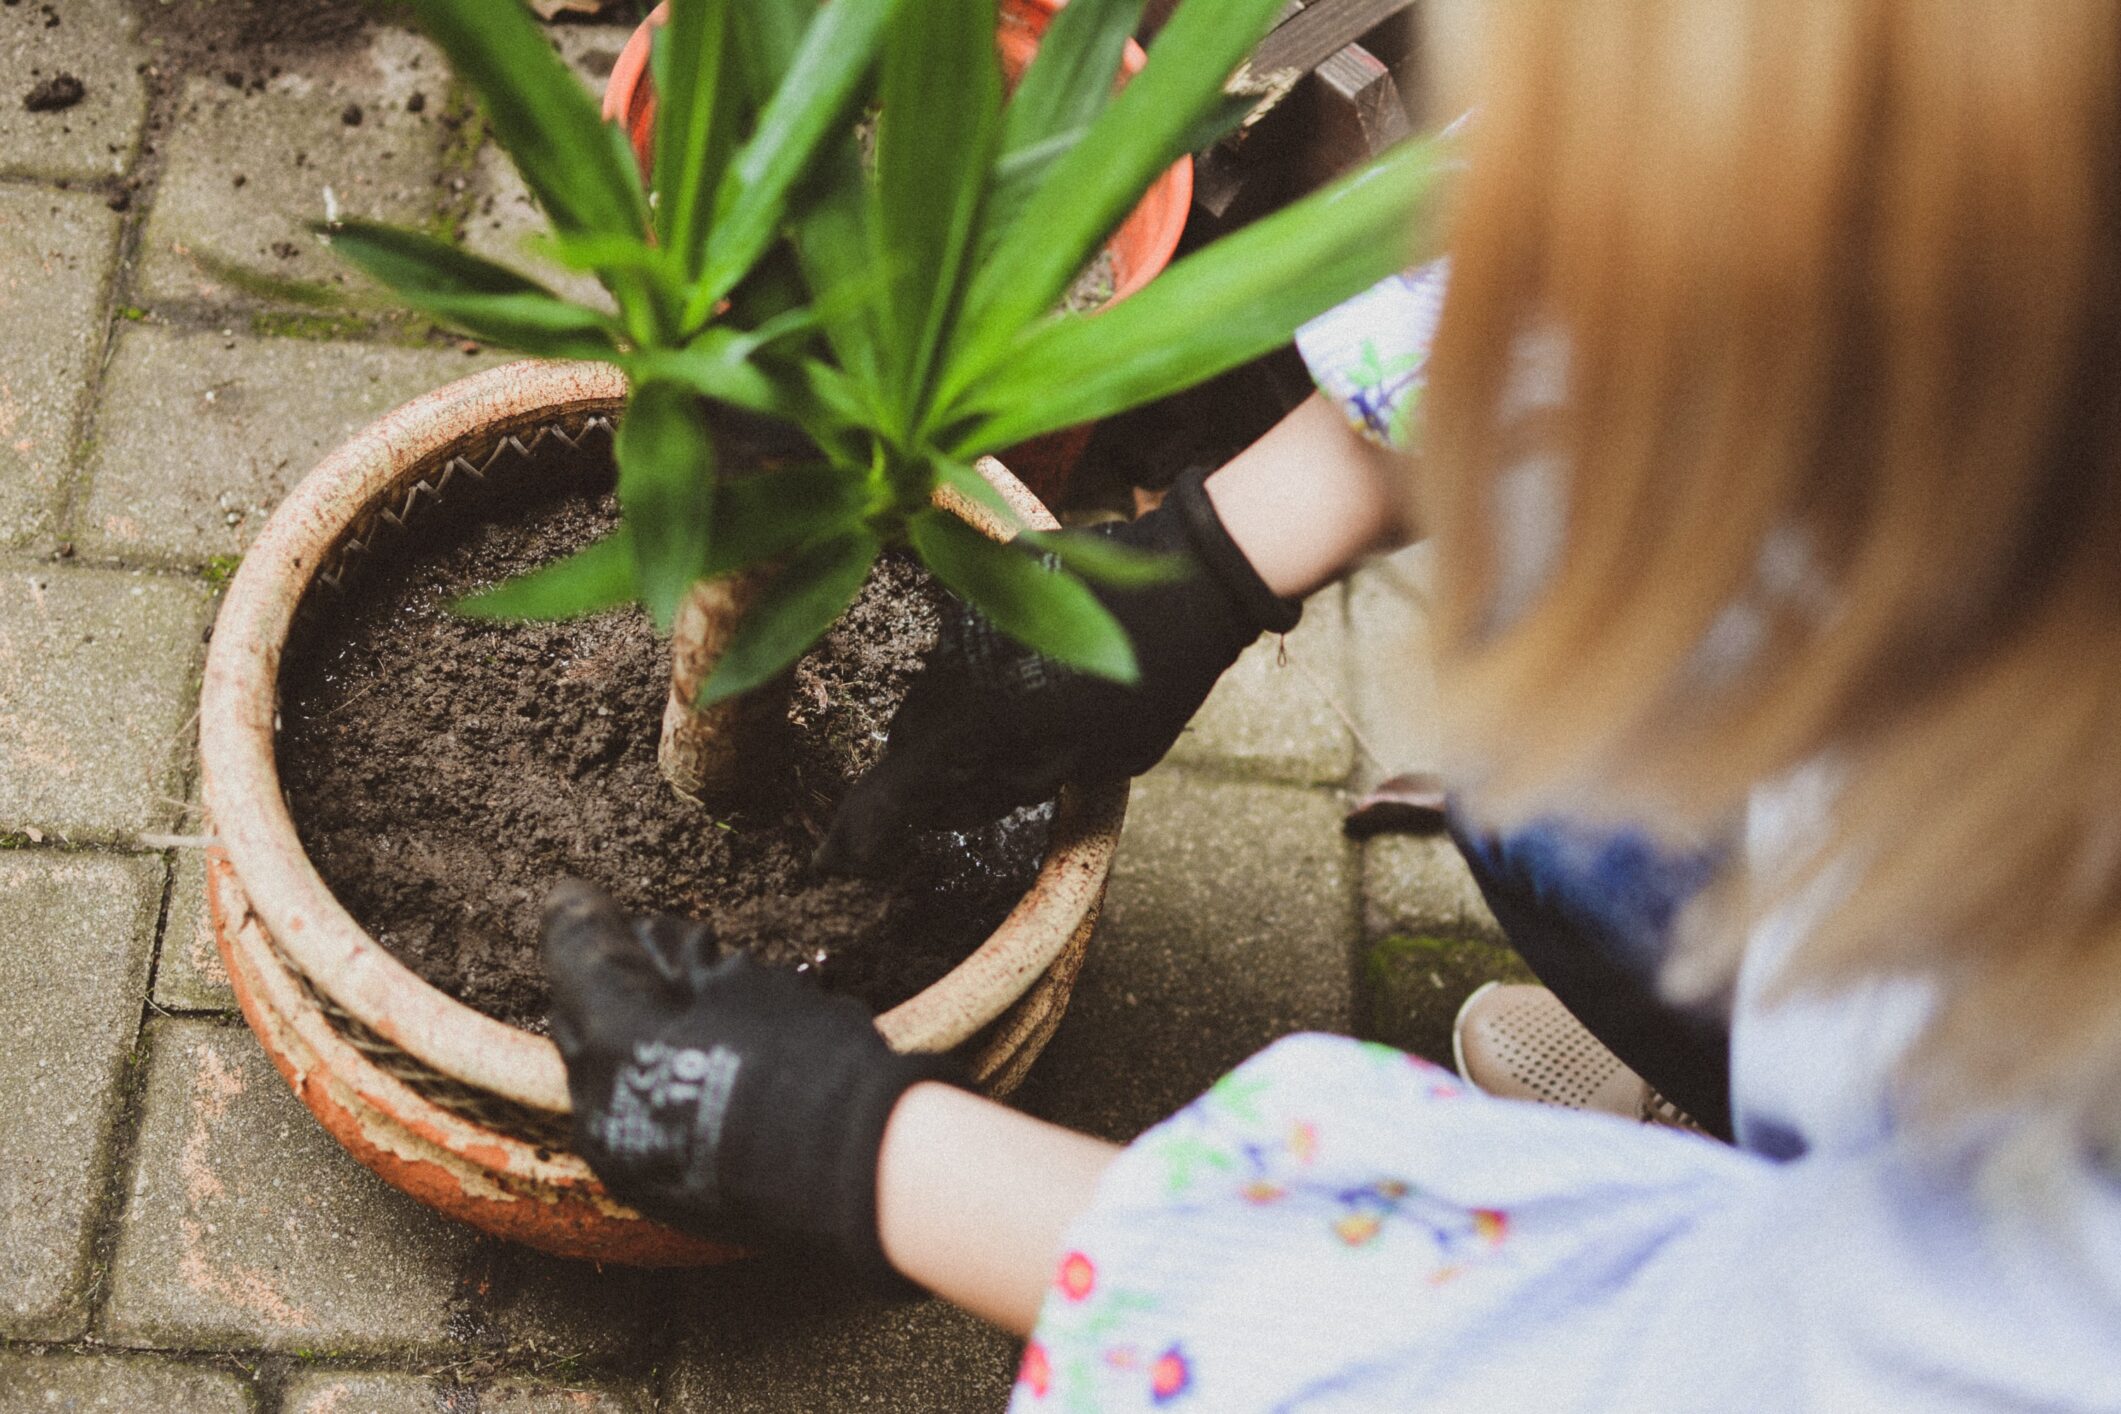 Gardening has been shown to be beneficial to mental health.